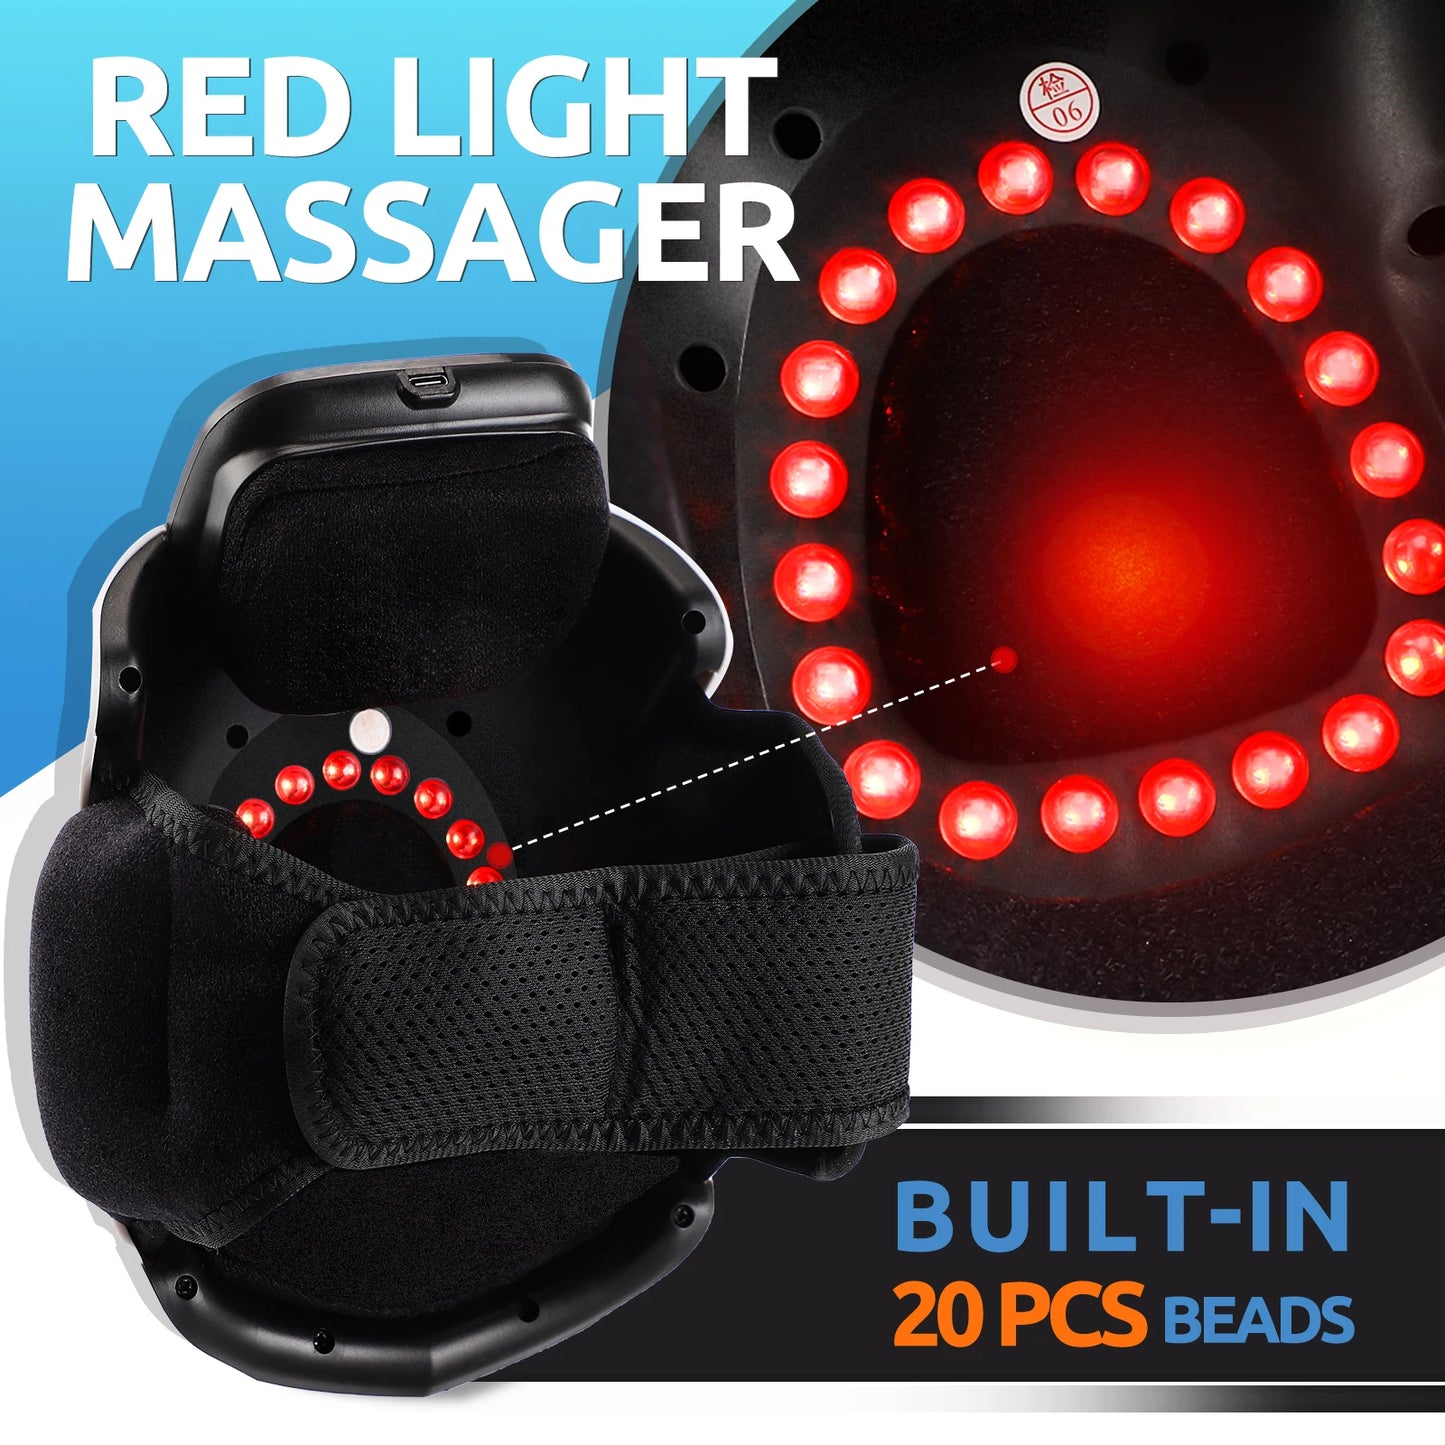 Electric Air Pressure Knee Massager + Infrared Heating